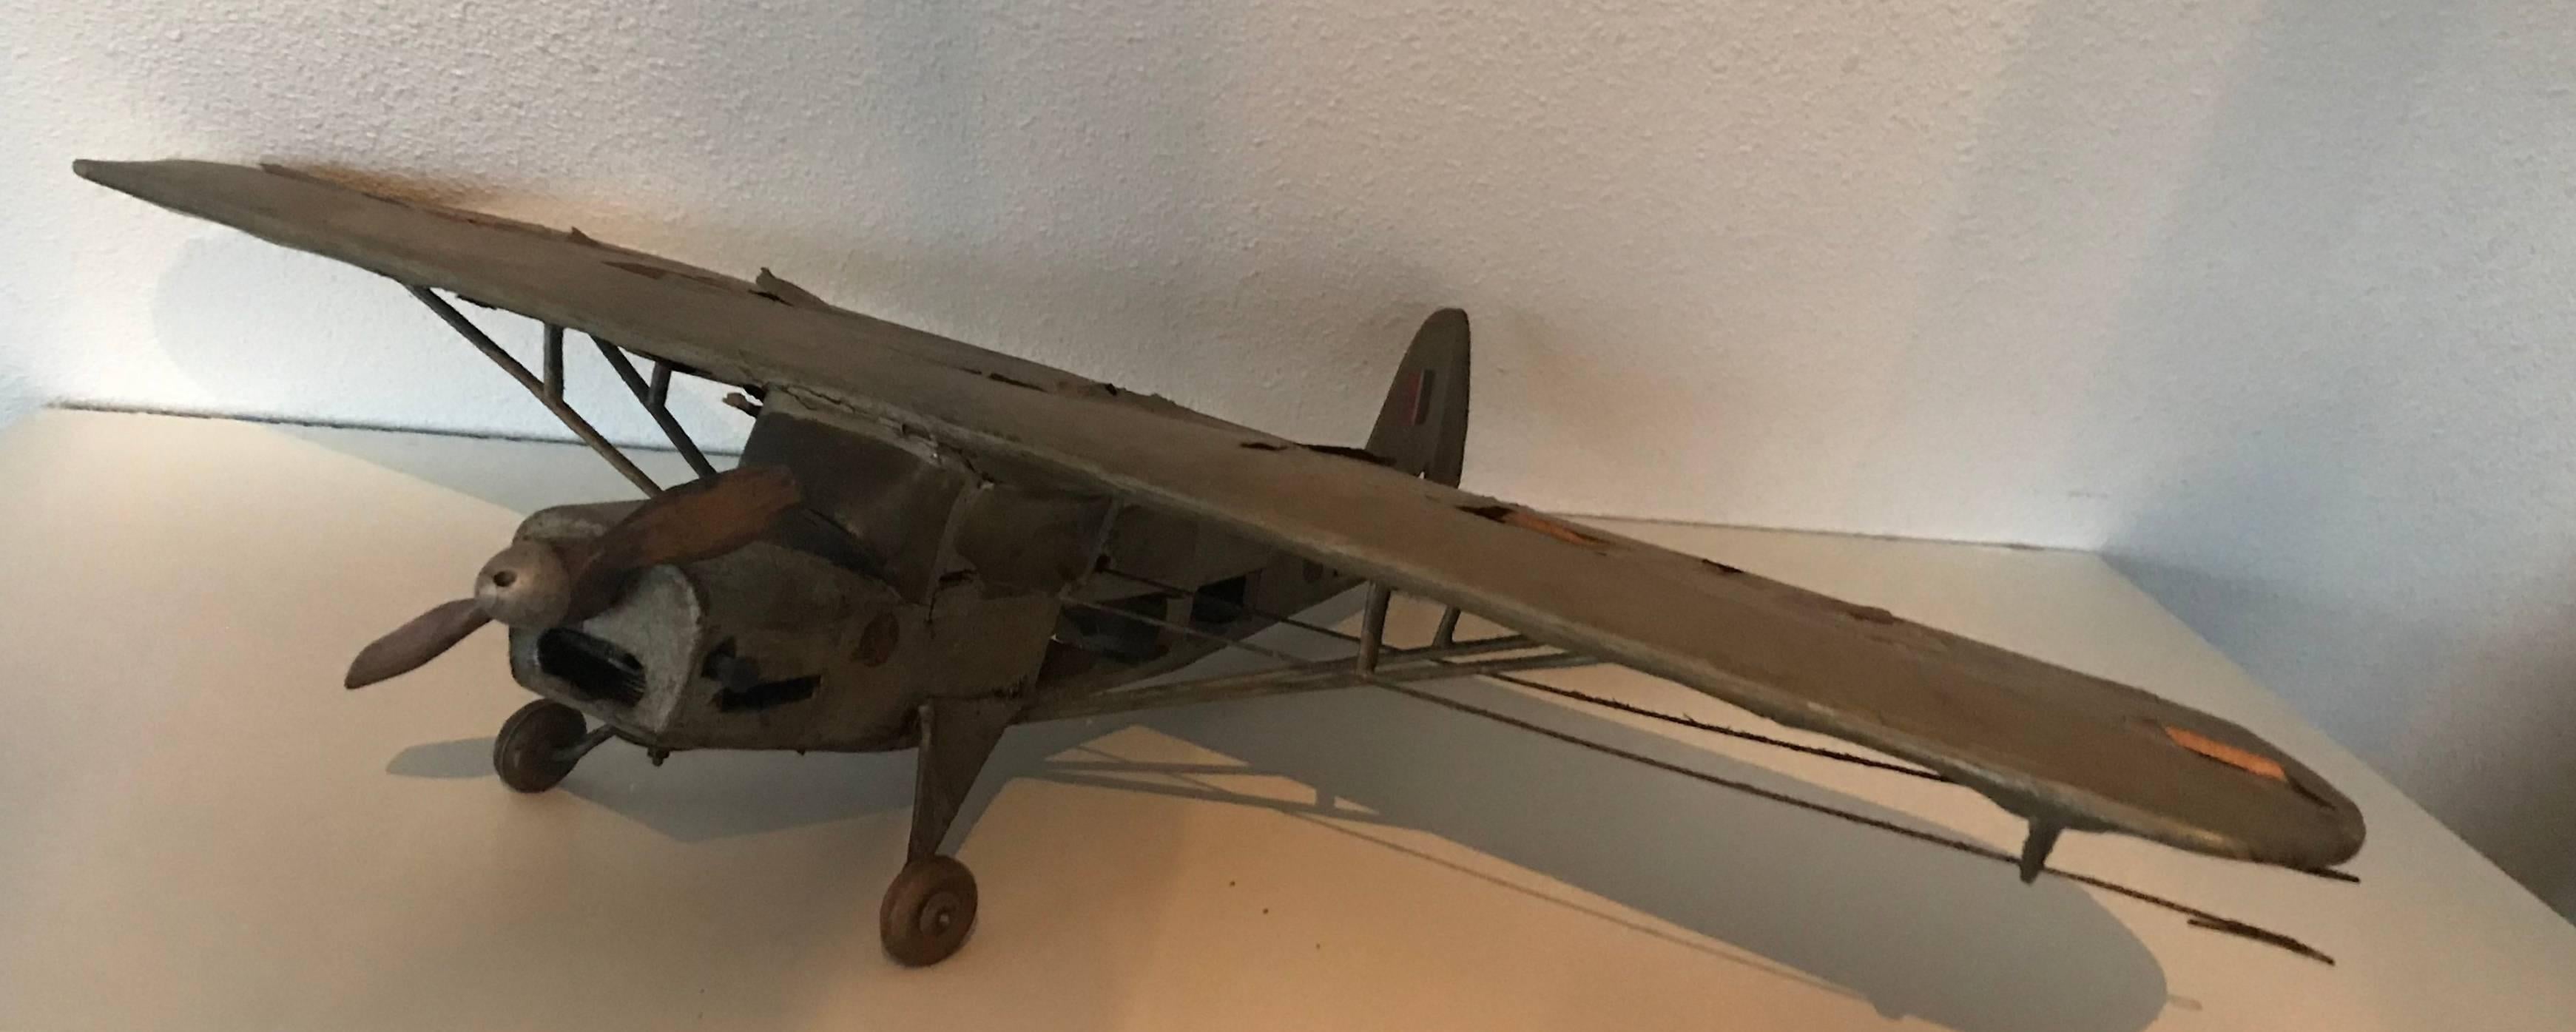 Hand-Crafted Airplane Model For Sale